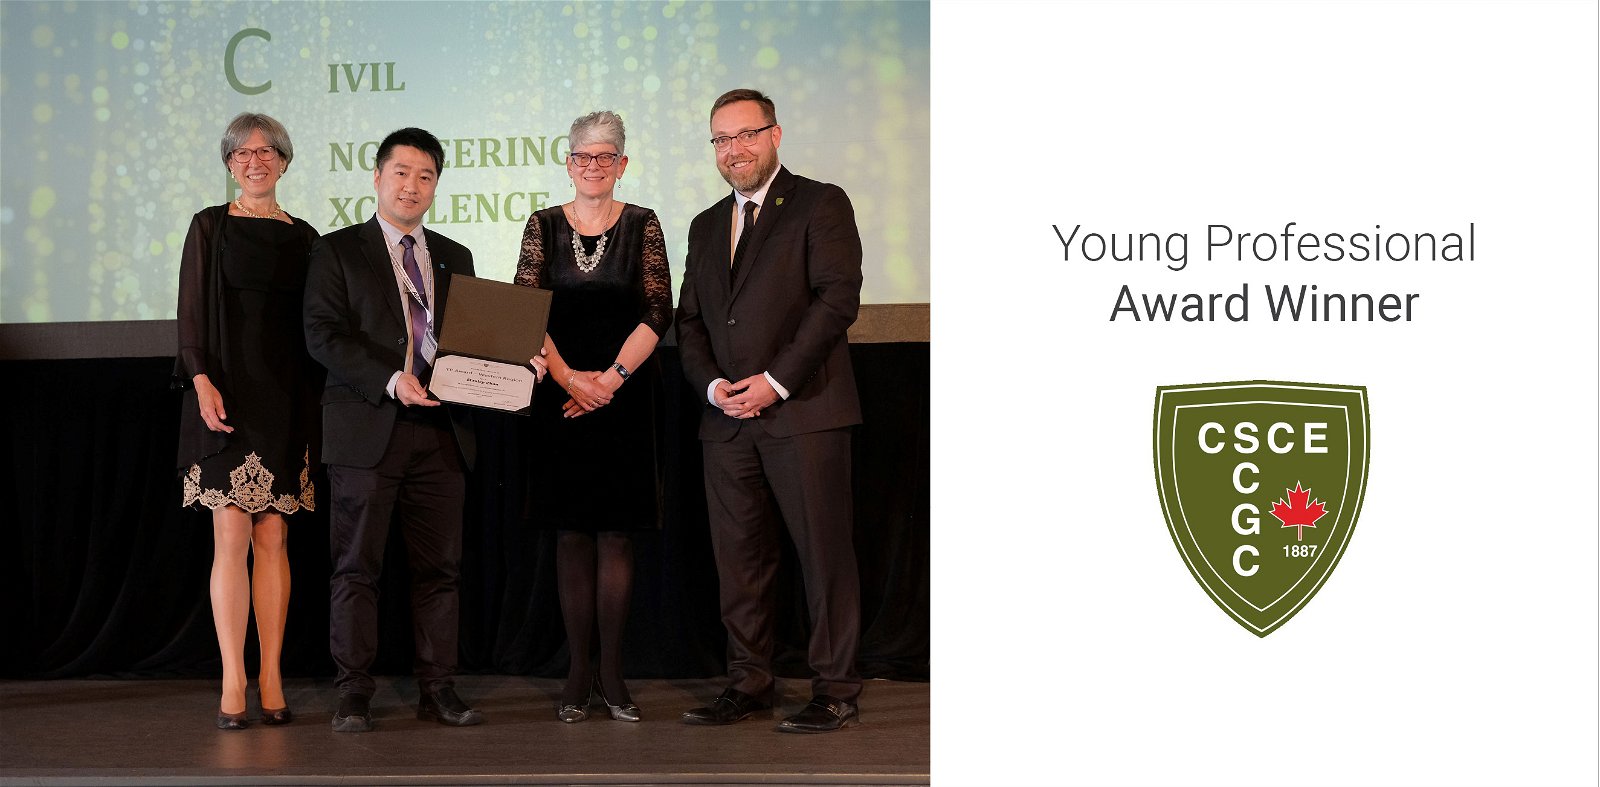 Stanley Chan Receives CSCE Young Professional Award